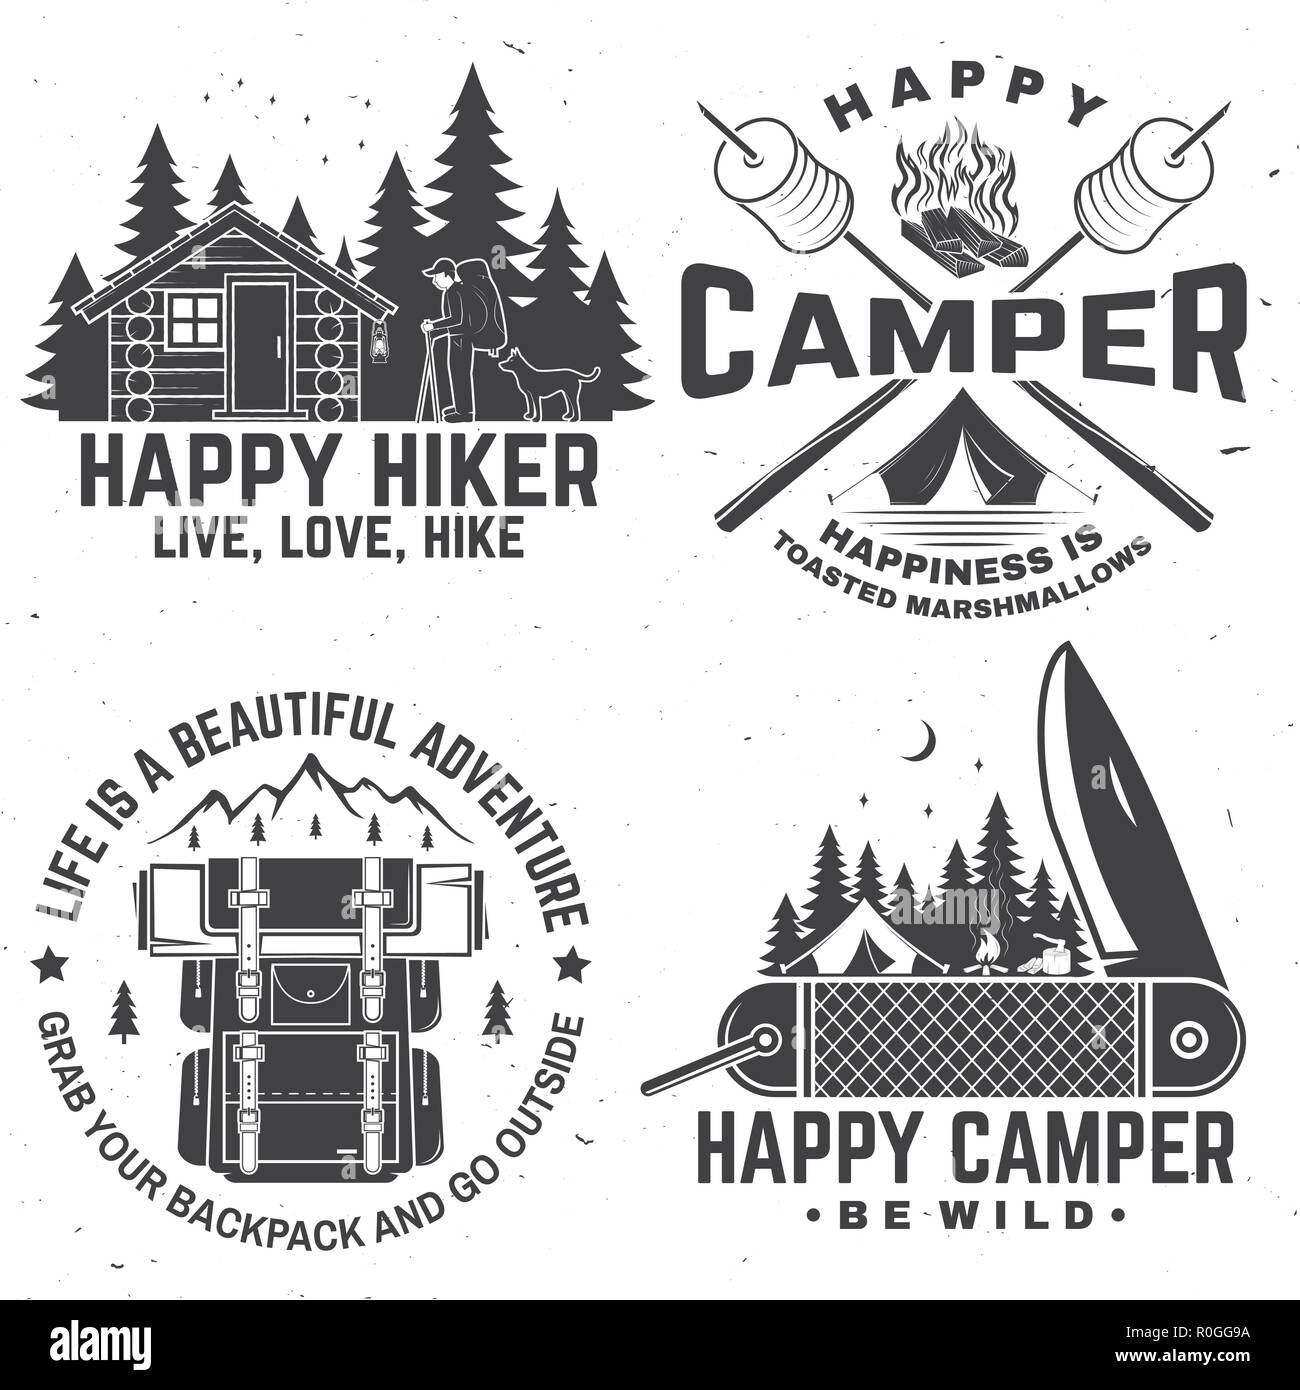 Happy camper. Vector. Concept for shirt or logo, print, stamp or tee. Vintage design with pocket knife, camping tent, campfire, forest cabin, sweet marshmallows on stick and forest silhouette. Stock Vector